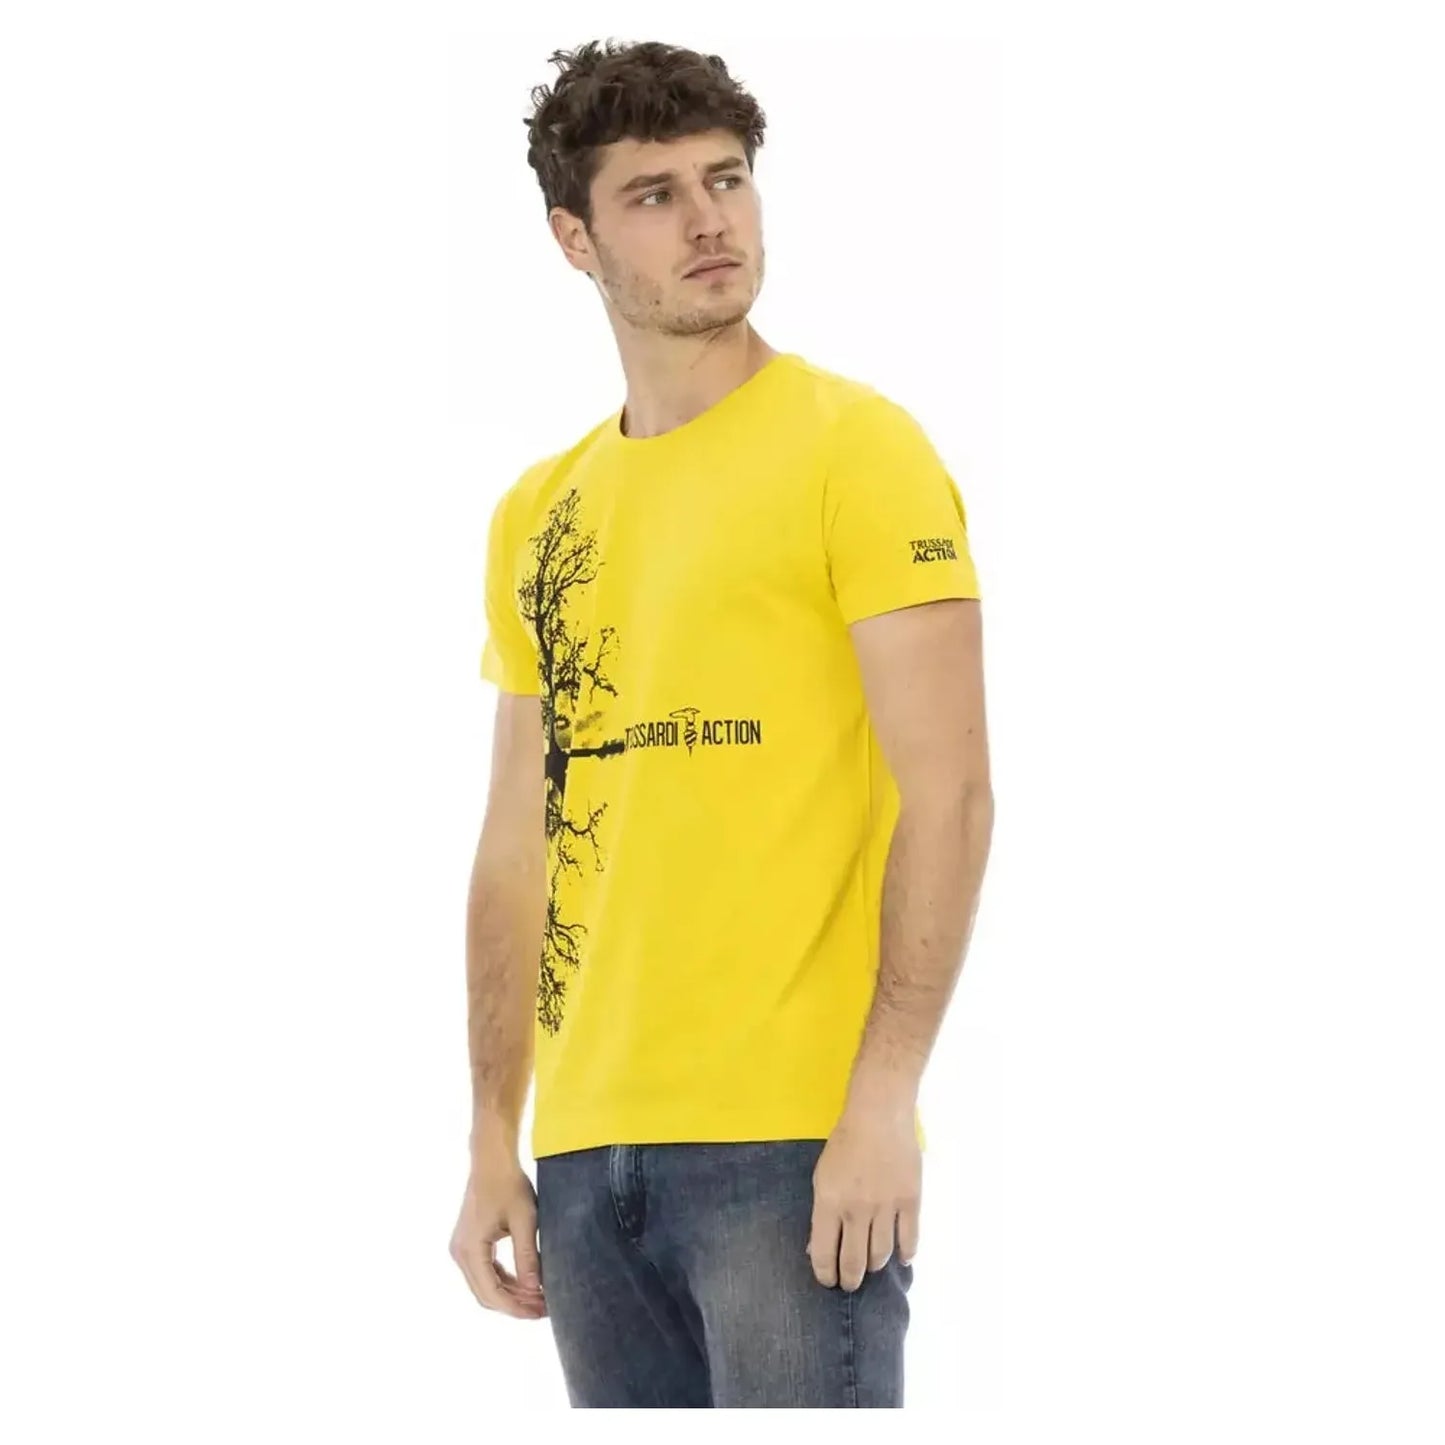 Trussardi Action Sunny Day Casual Chic Cotton Tee yellow-cotton-t-shirt-9